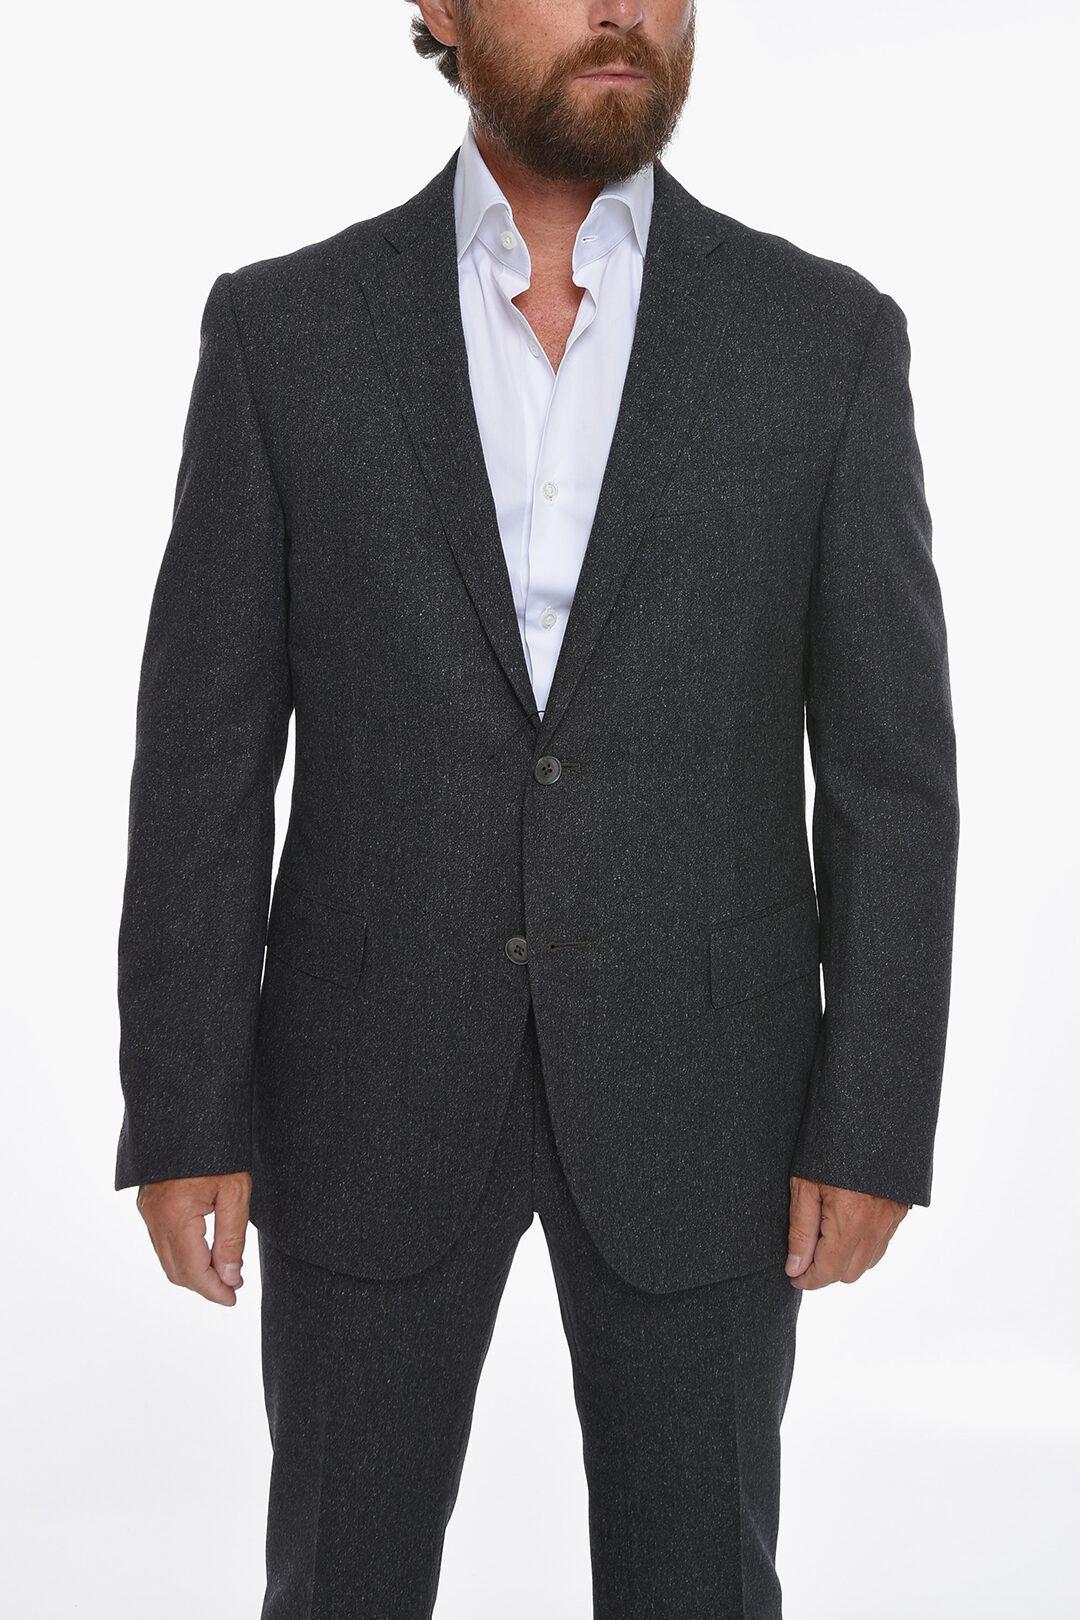 Corneliani Wool and Silk ACADEMY SOFT Suit with Flap Pockets men ...